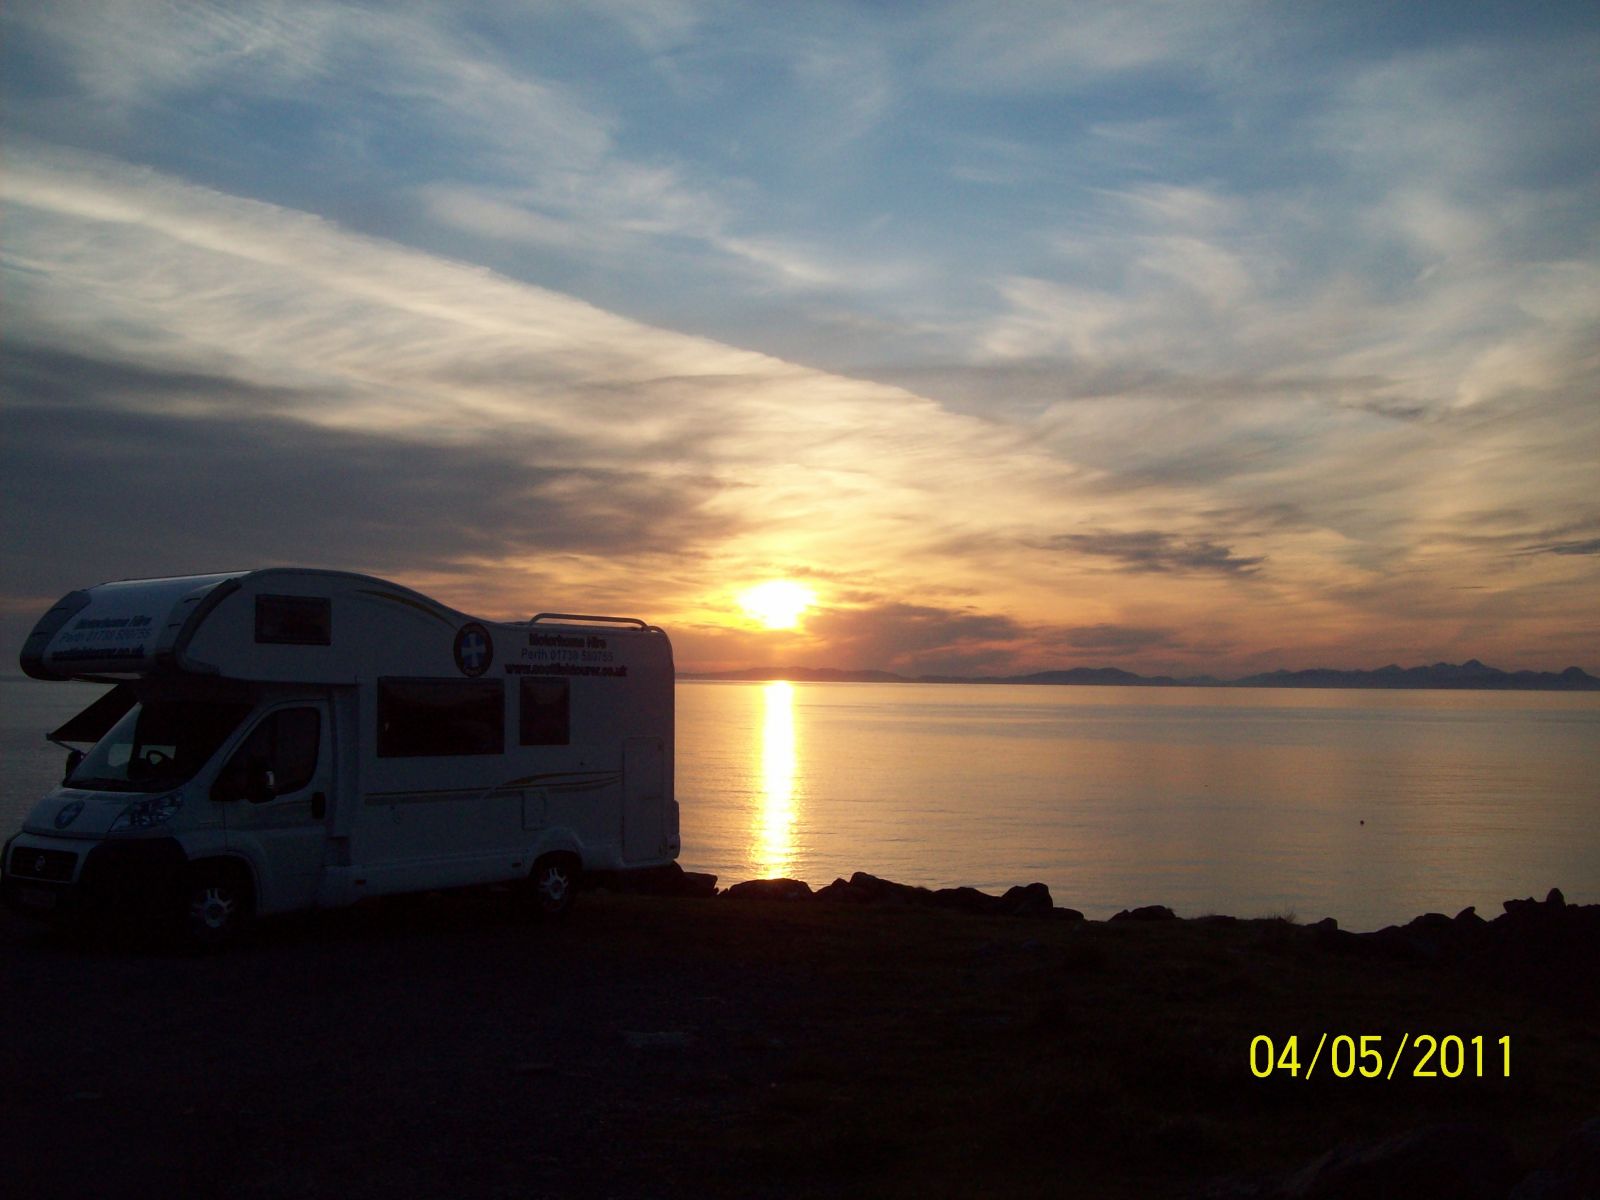 Sunset with the motorhome